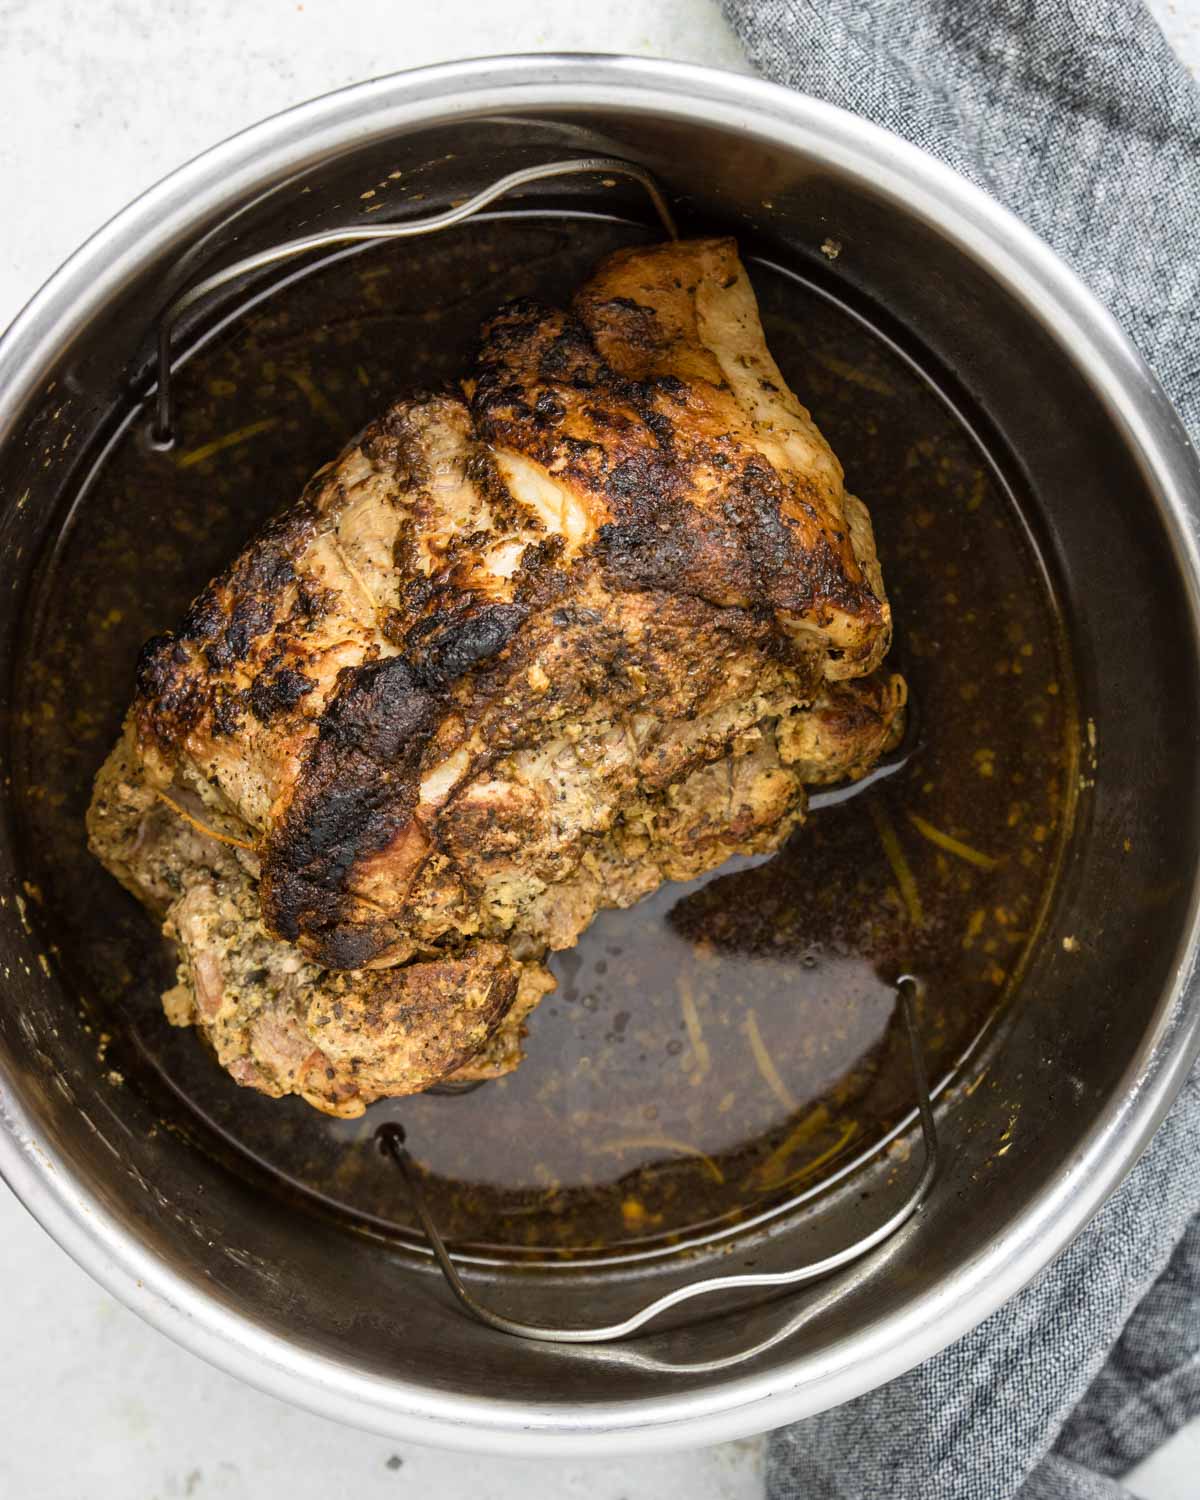 a pork roast that has been browned and is in the Instant Pot to be cooked